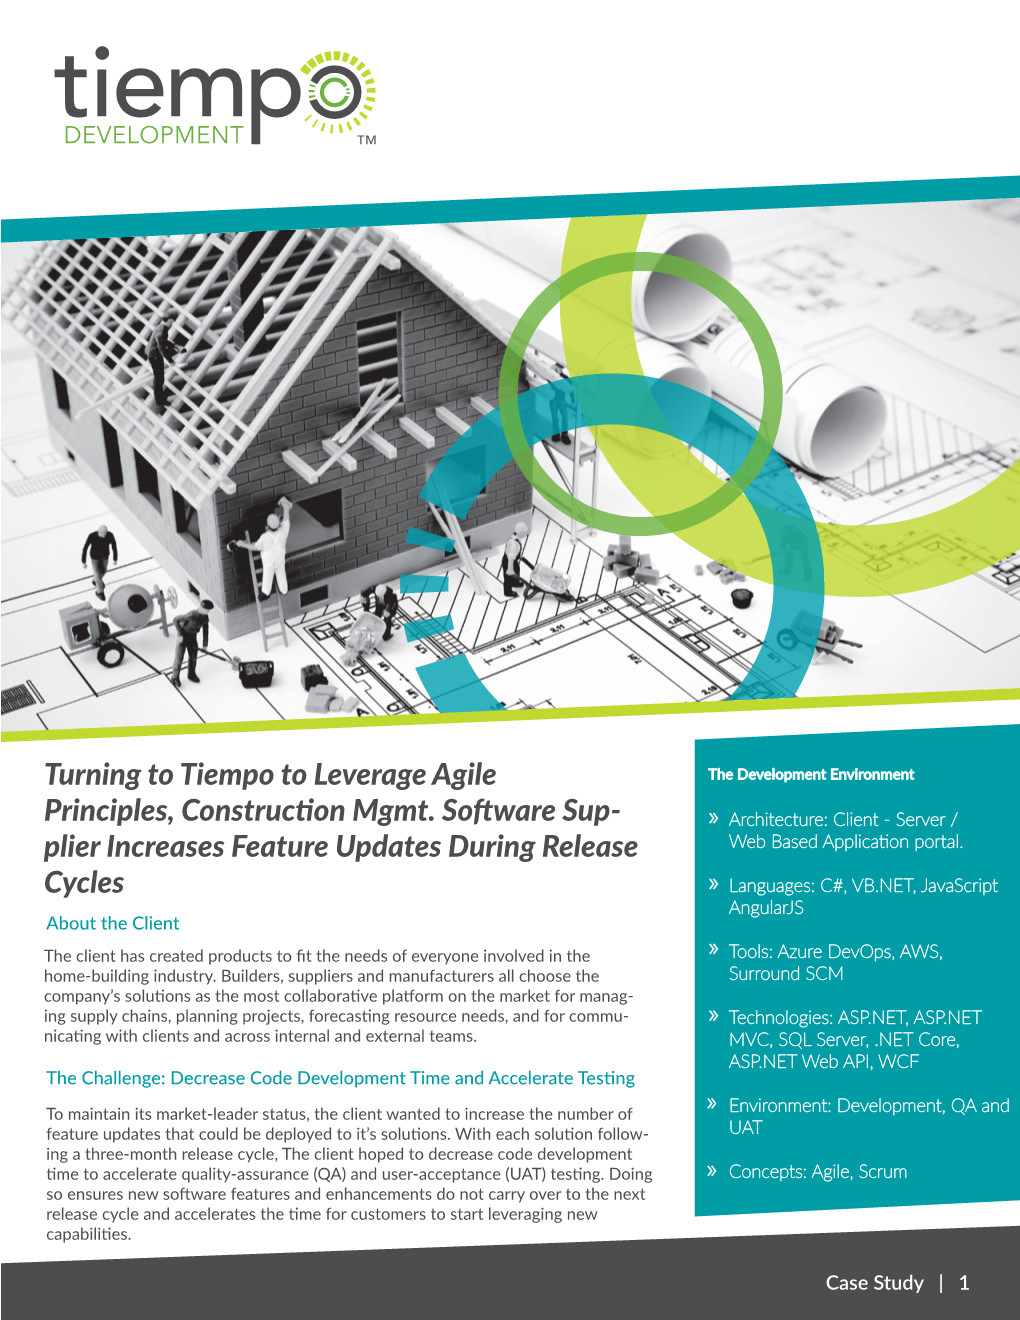 Case Study | 1 the Solution: Agile Principles and Best Practices Supported by Tiempo Expertise